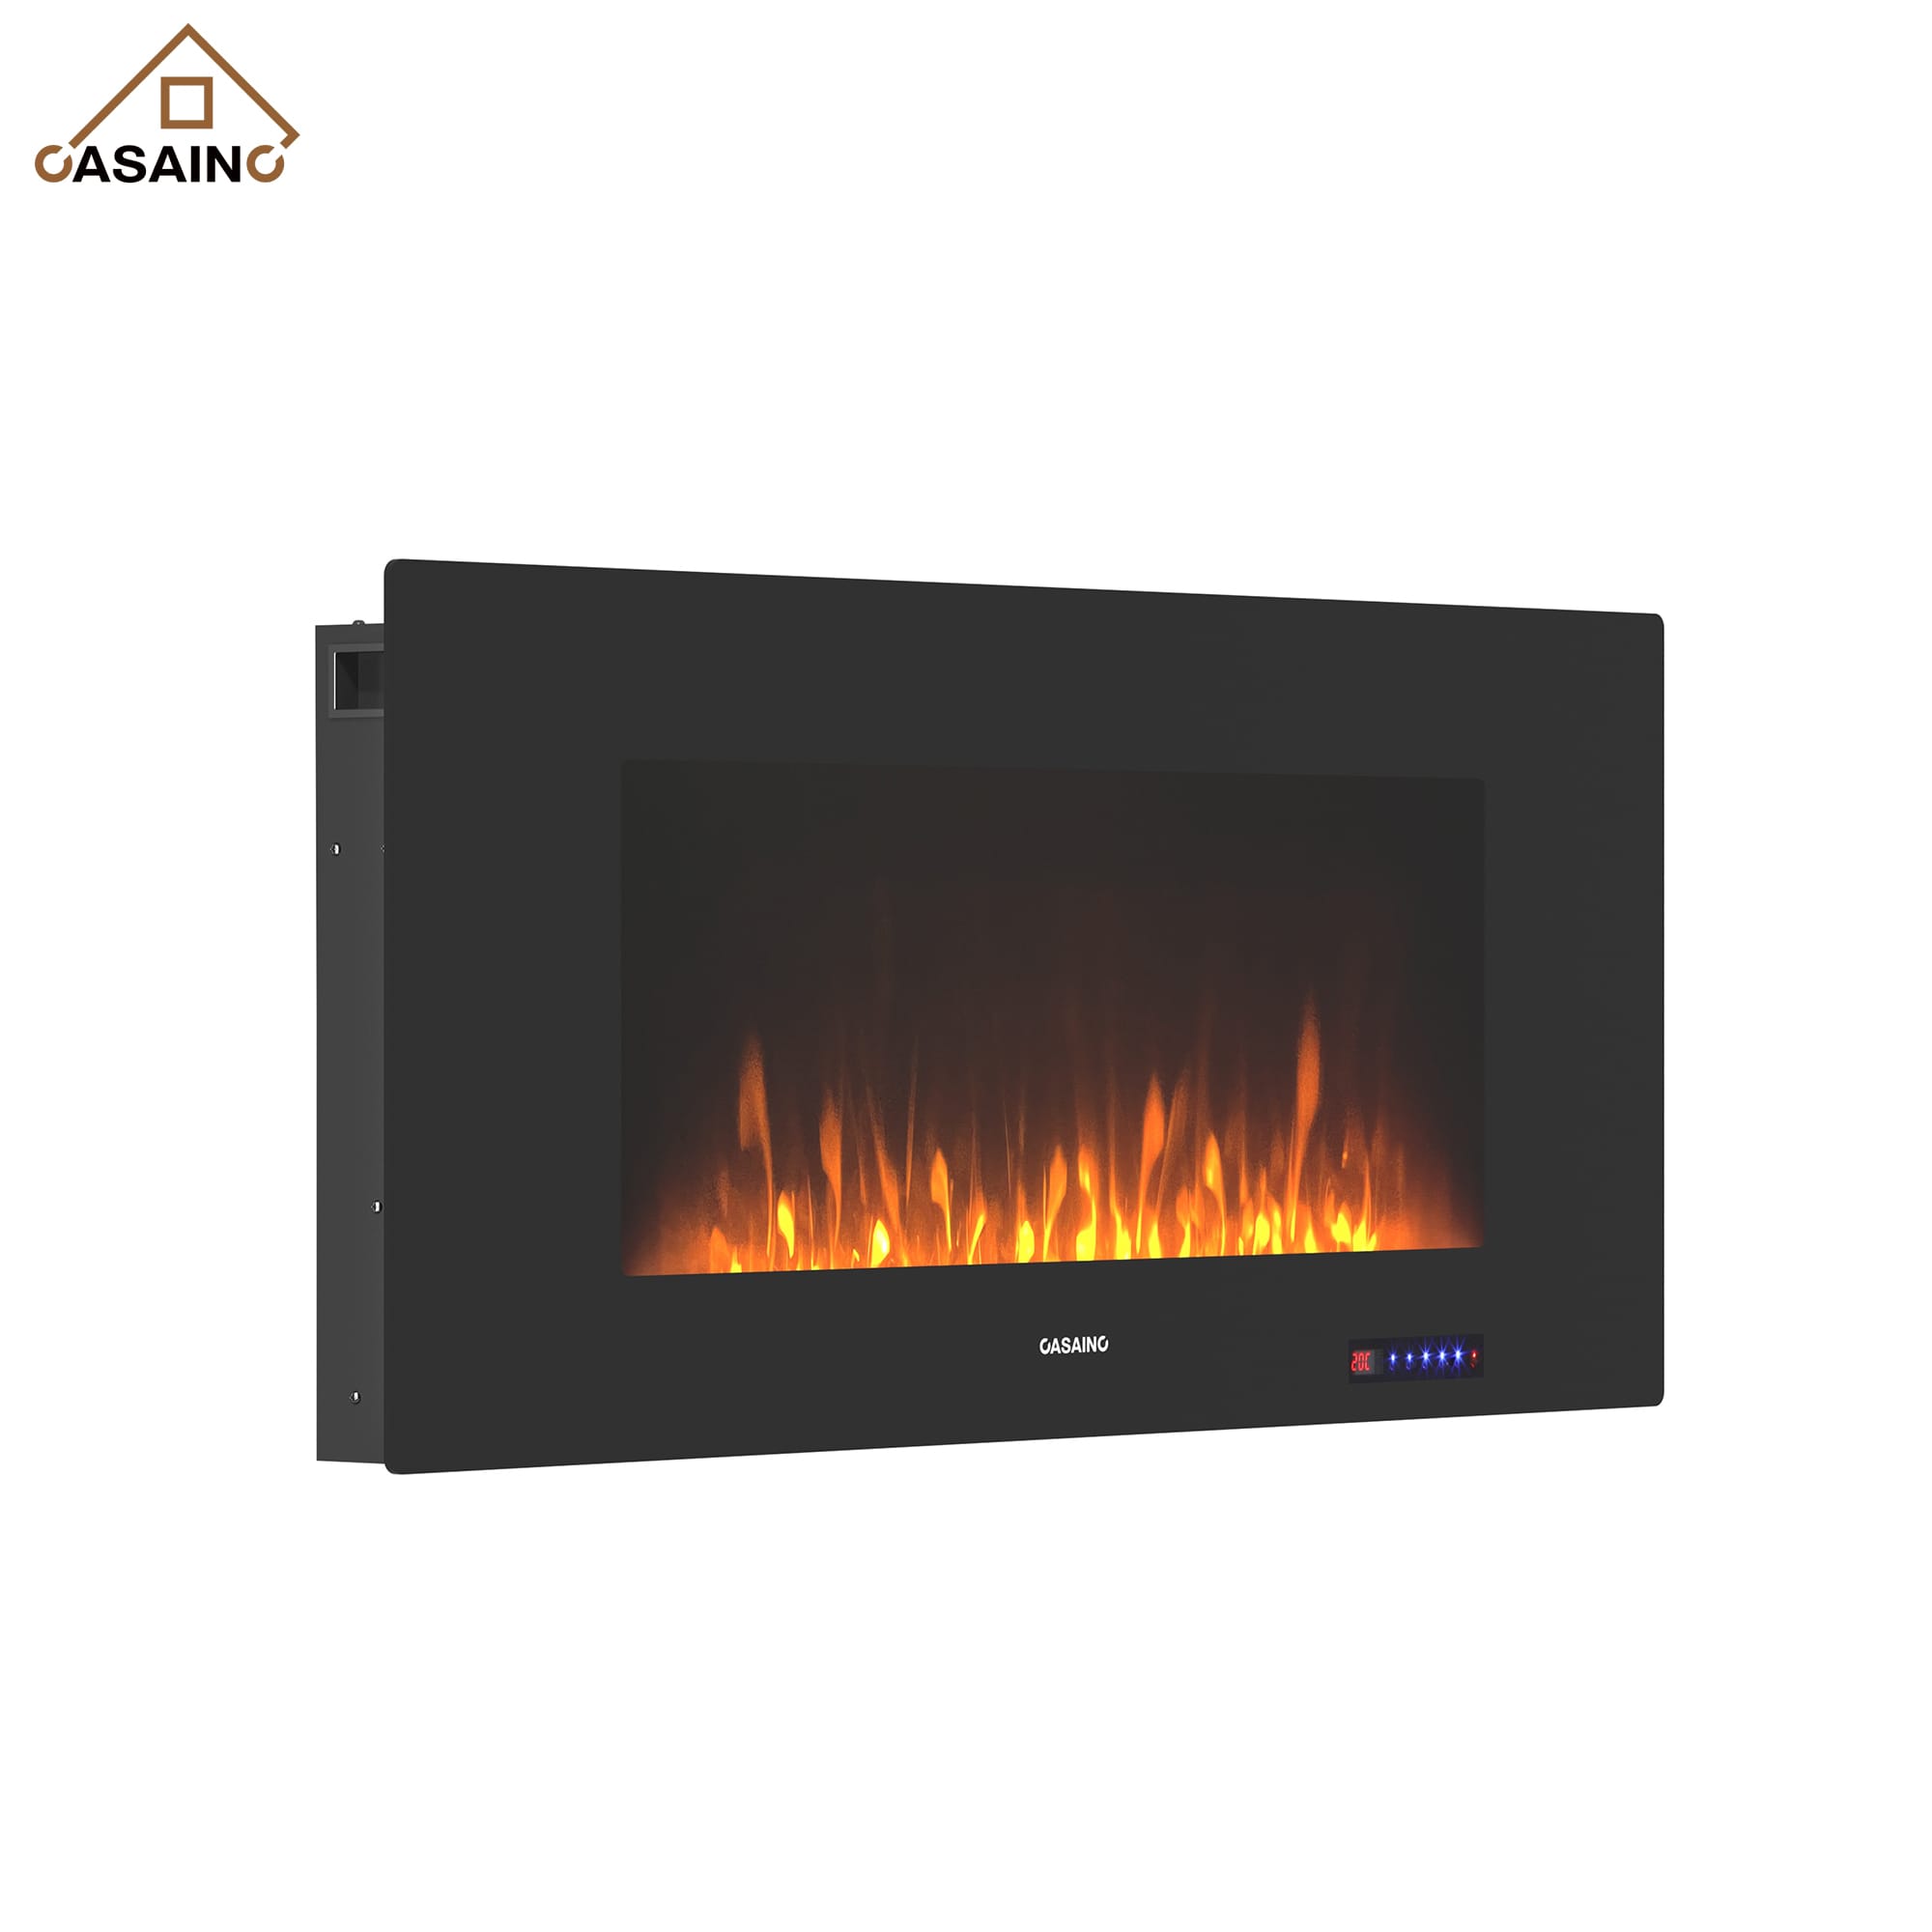 42 Inch Wall-Mounted Electric Fireplace in Black